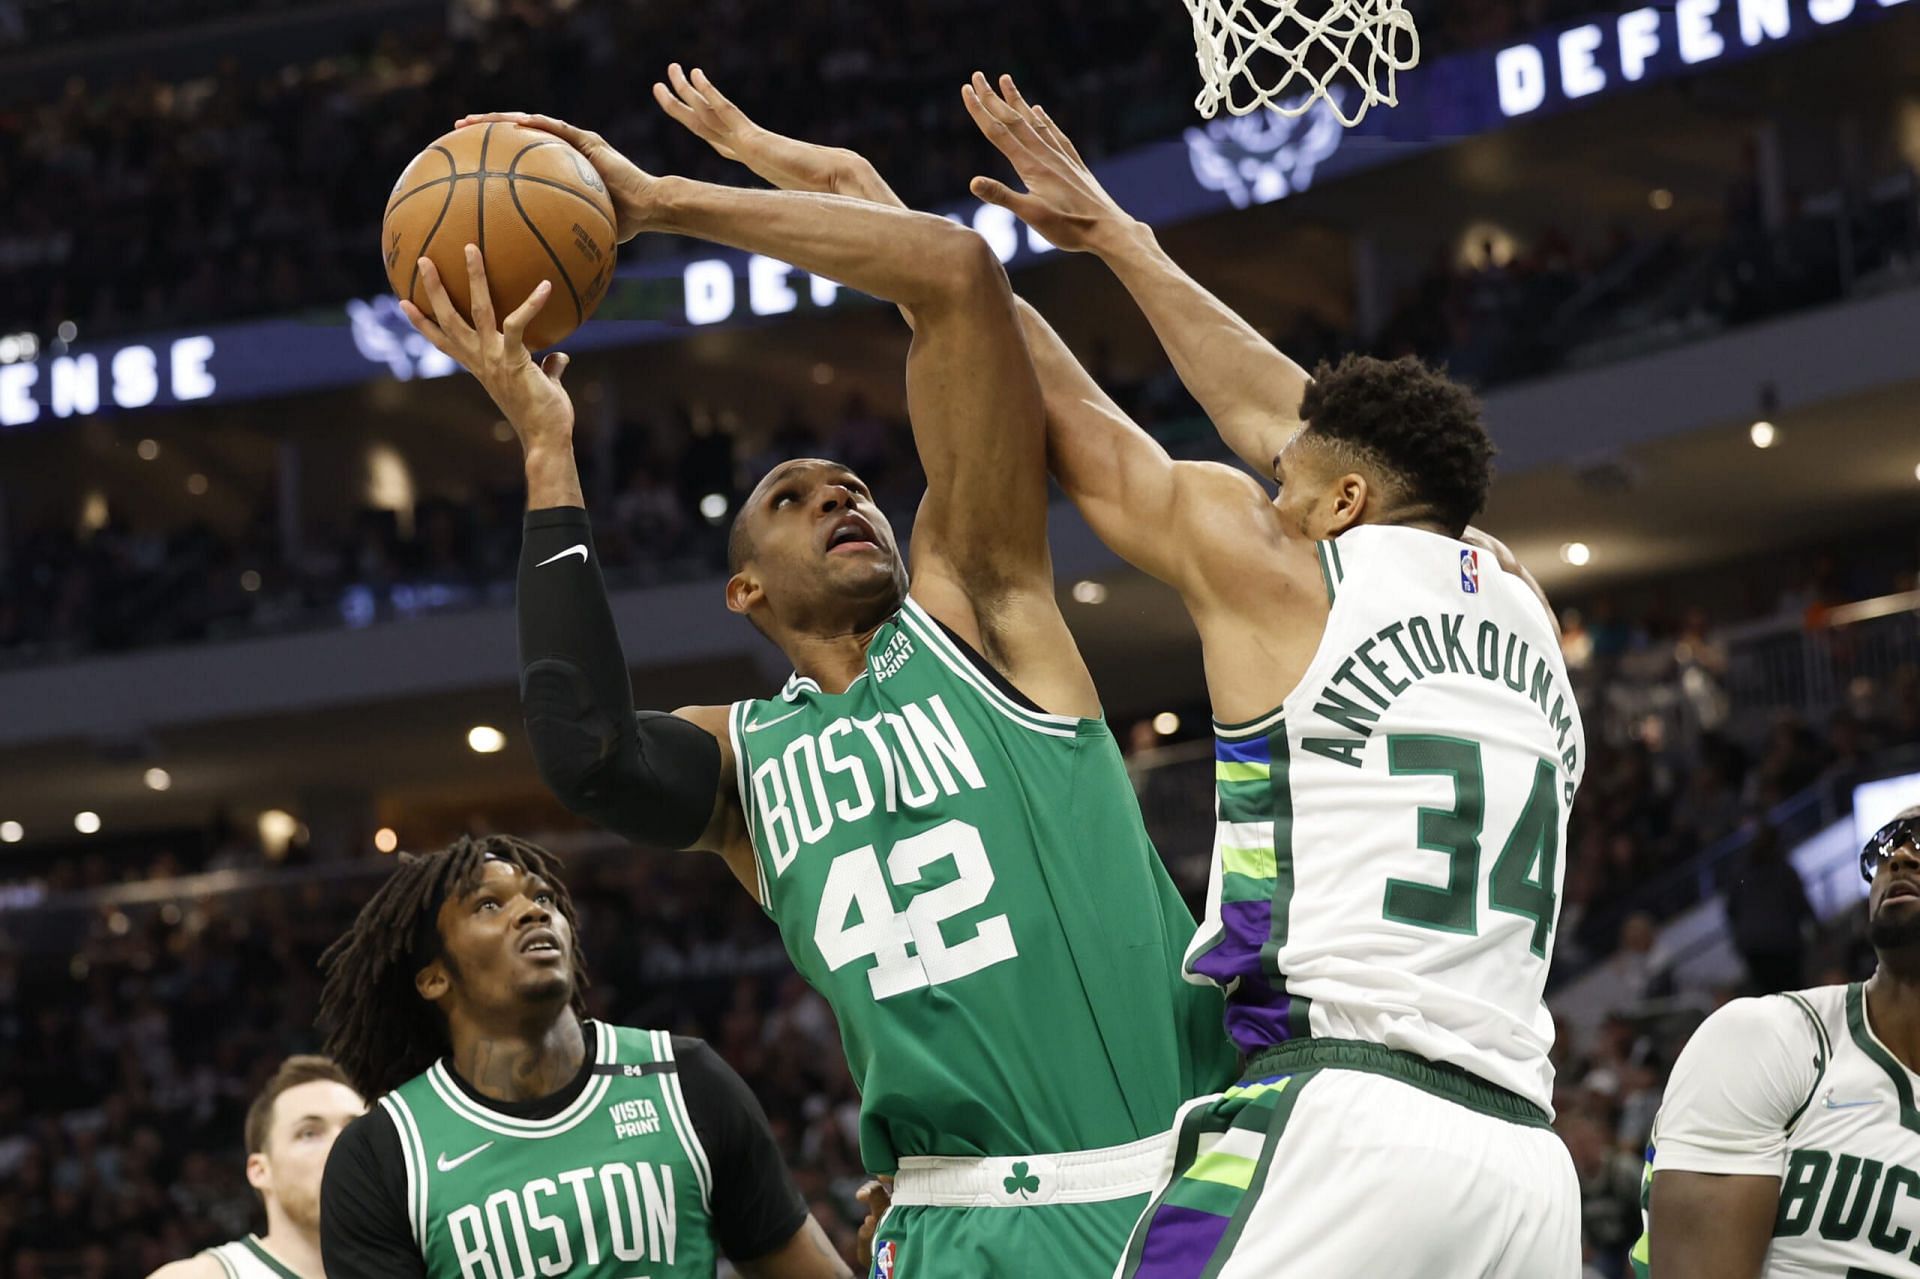 Al Horford has been holding his own against &quot;The Greek Freak.&quot; [Photo: Sportsnaut]